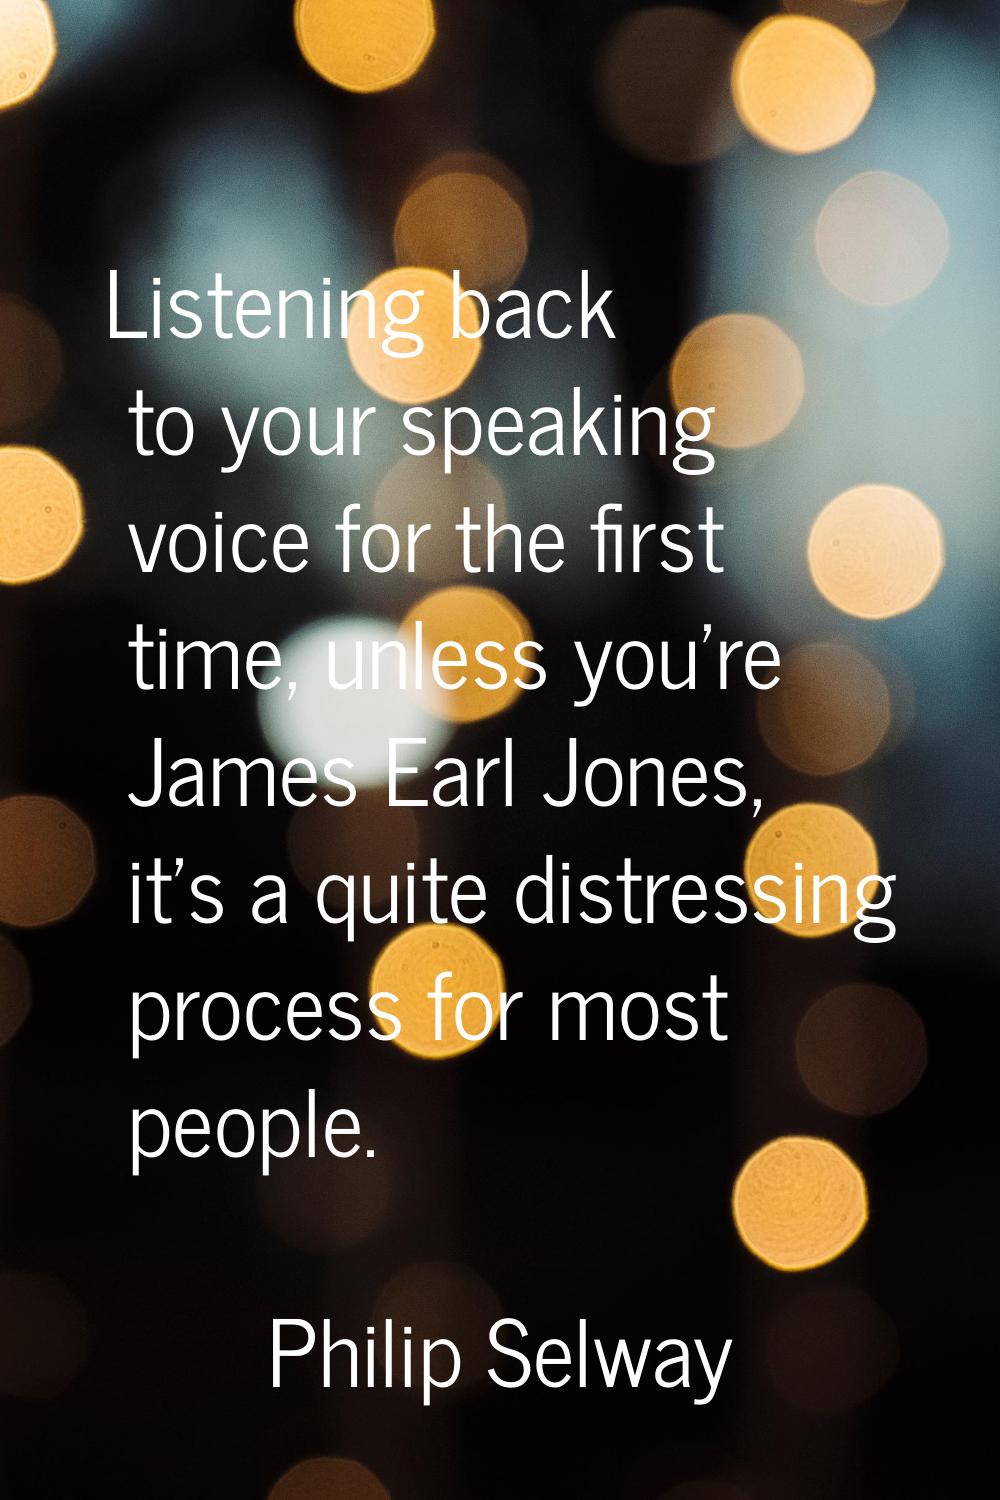 Listening back to your speaking voice for the first time, unless you're James Earl Jones, it's a qu